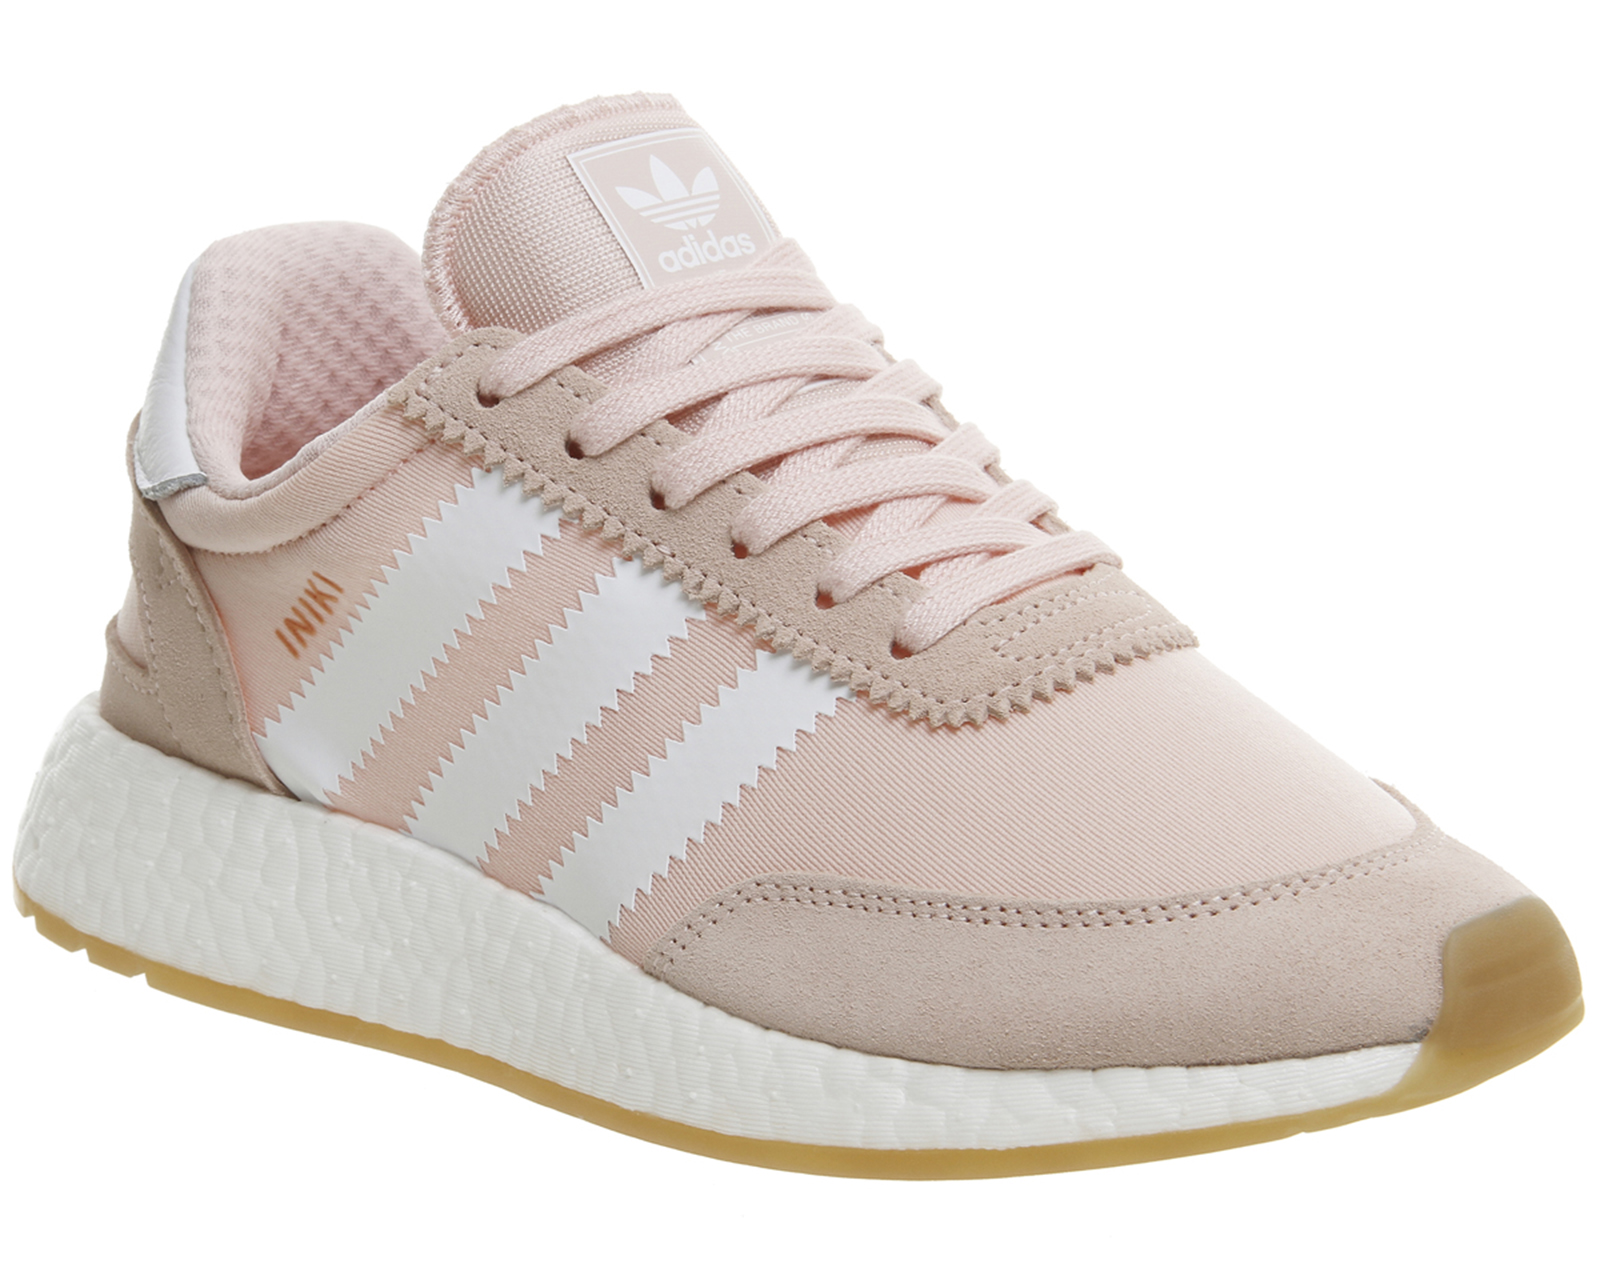 adidas Iniki Runners Icey Pink Gum - Hers trainers